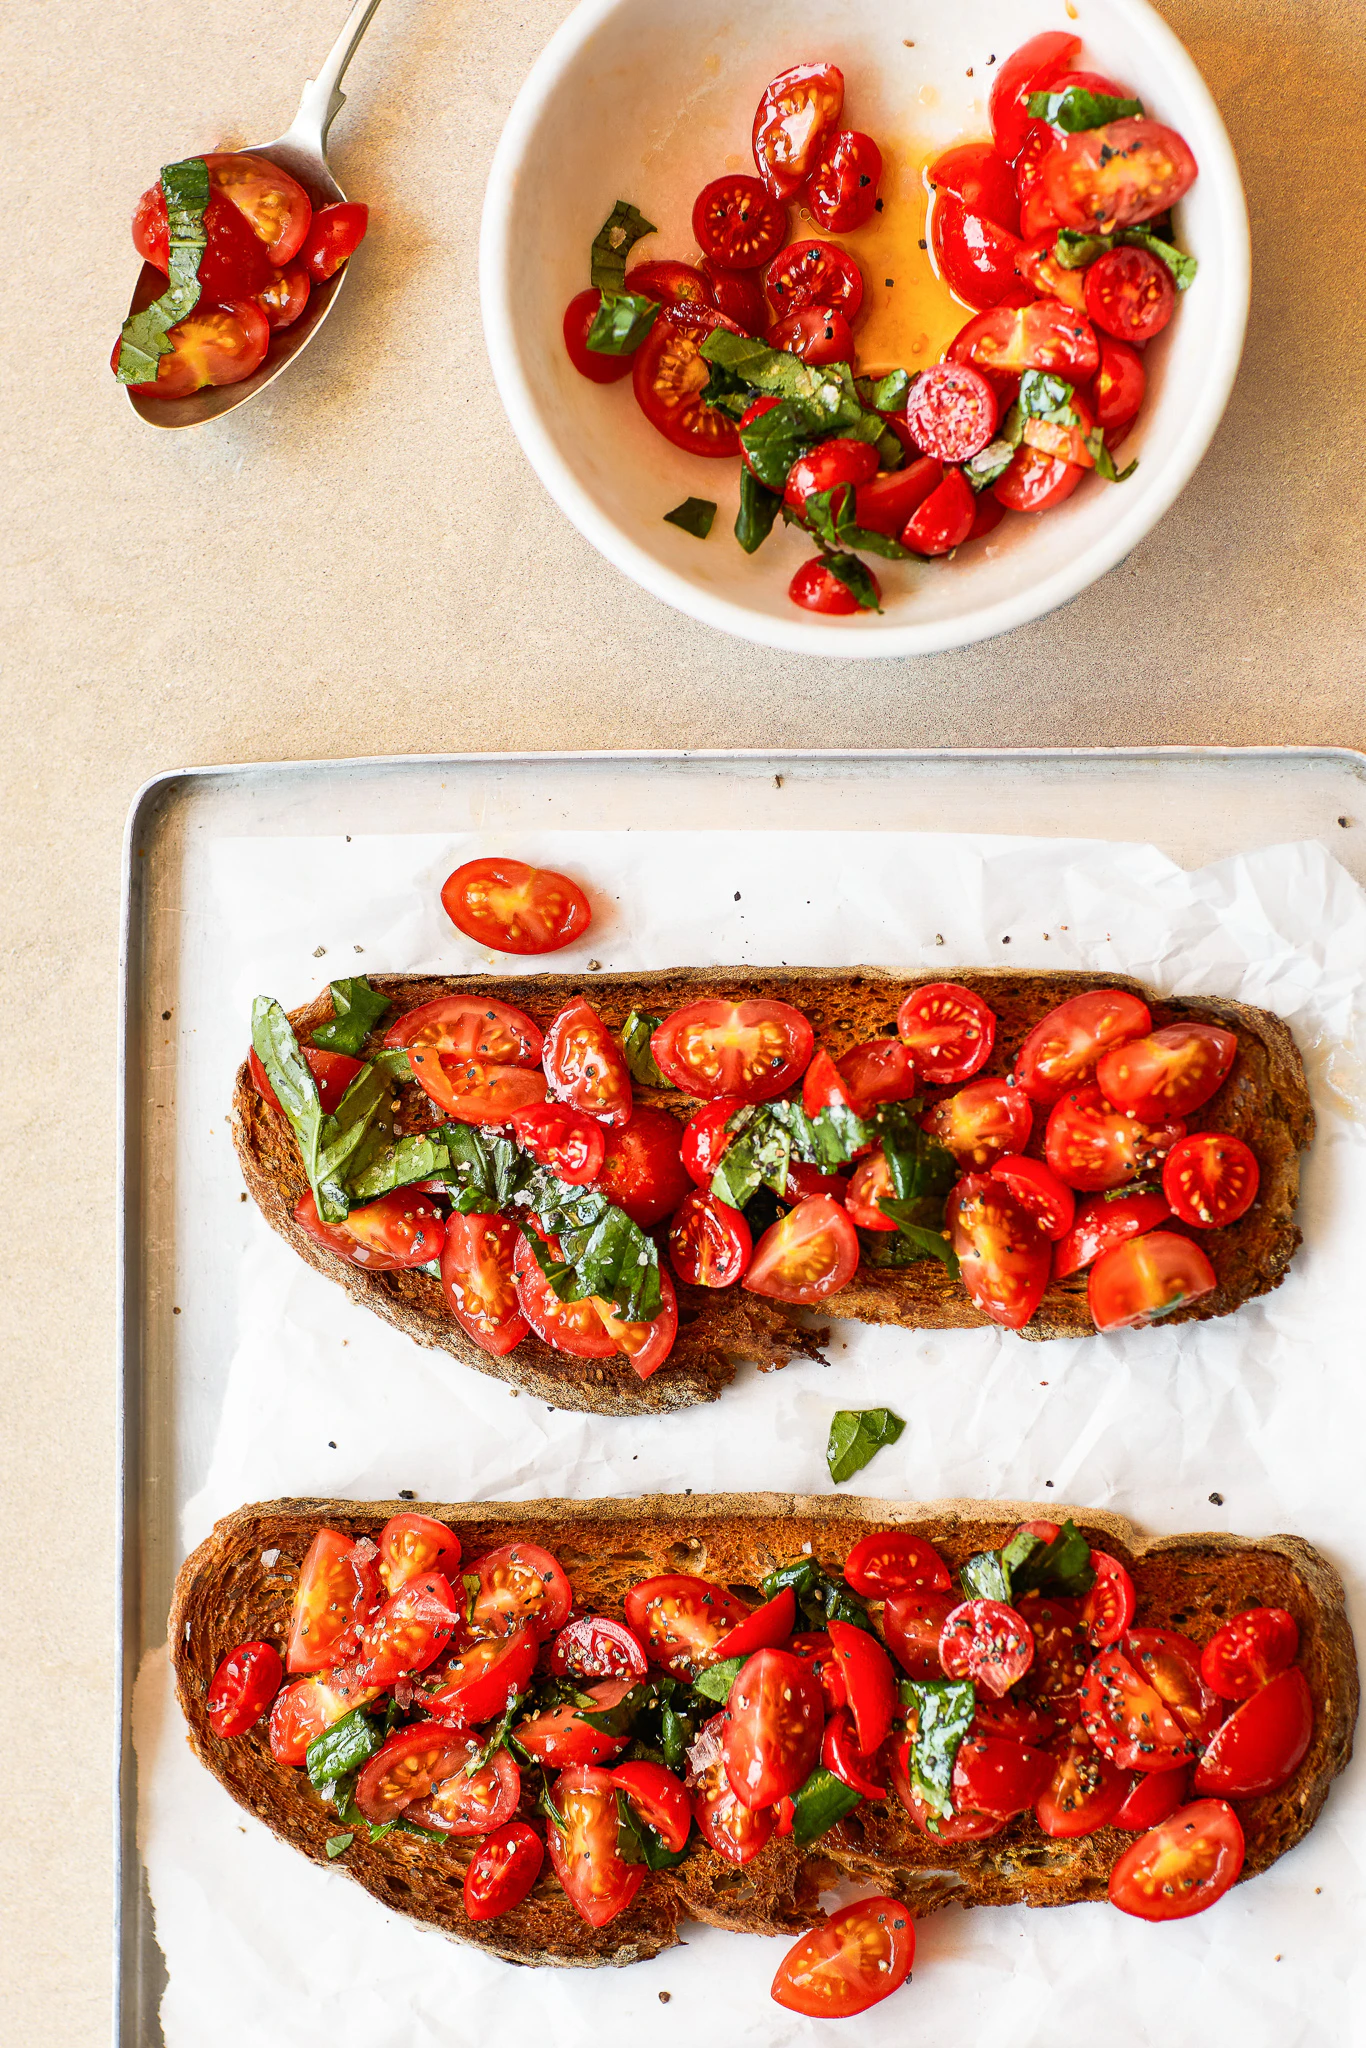 Two slices of pane Pugliese topped with tomatoes are on a tray next to a bowl of sliced tomatoes.